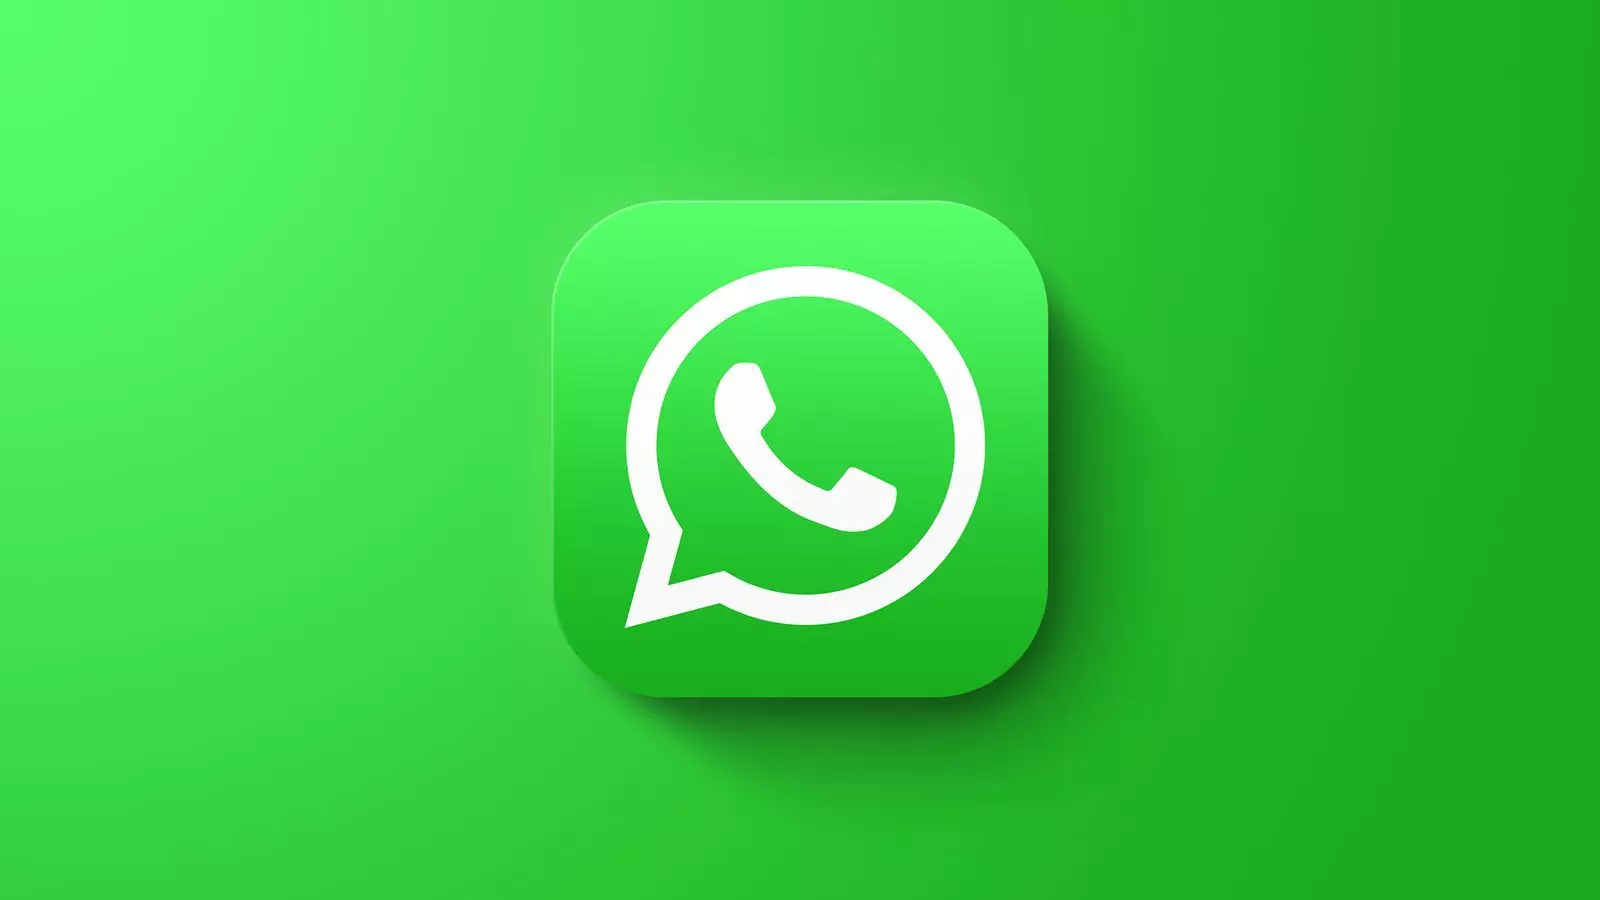 6 WhatsApp Mistakes to Avoid for Privacy and Security